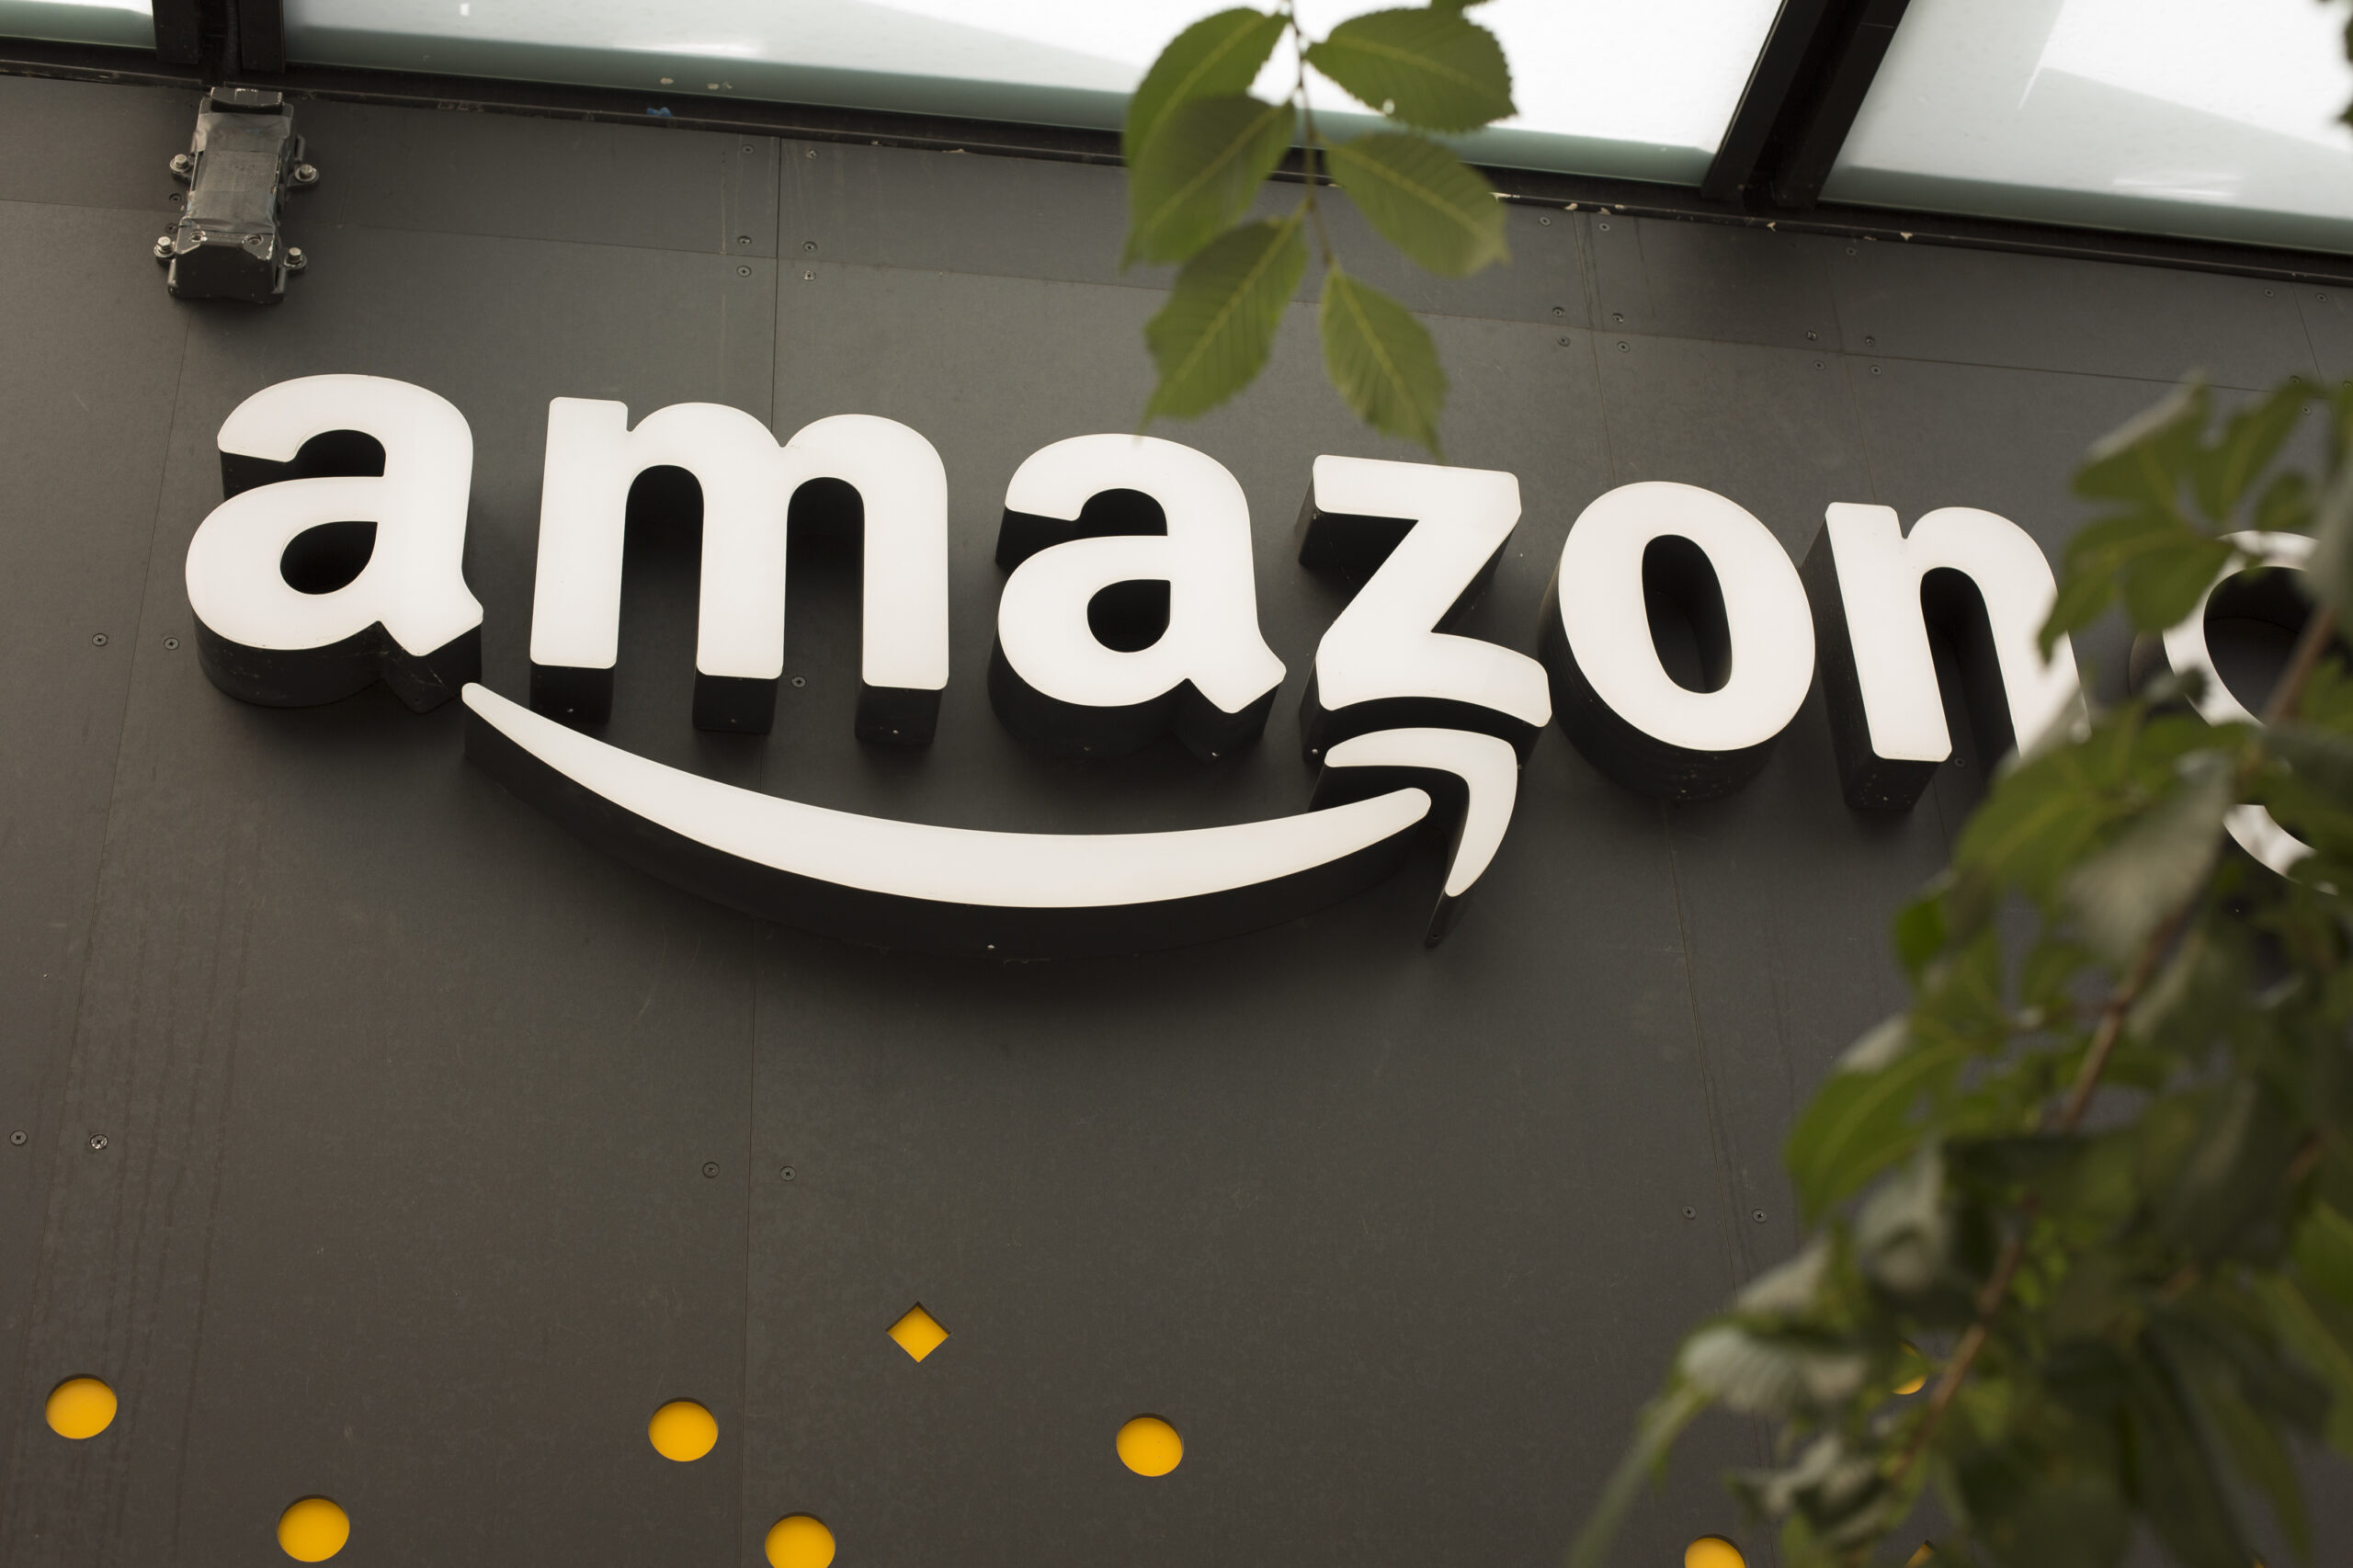 Amazon's acquisition of Whole Foods dominates this week's top 10